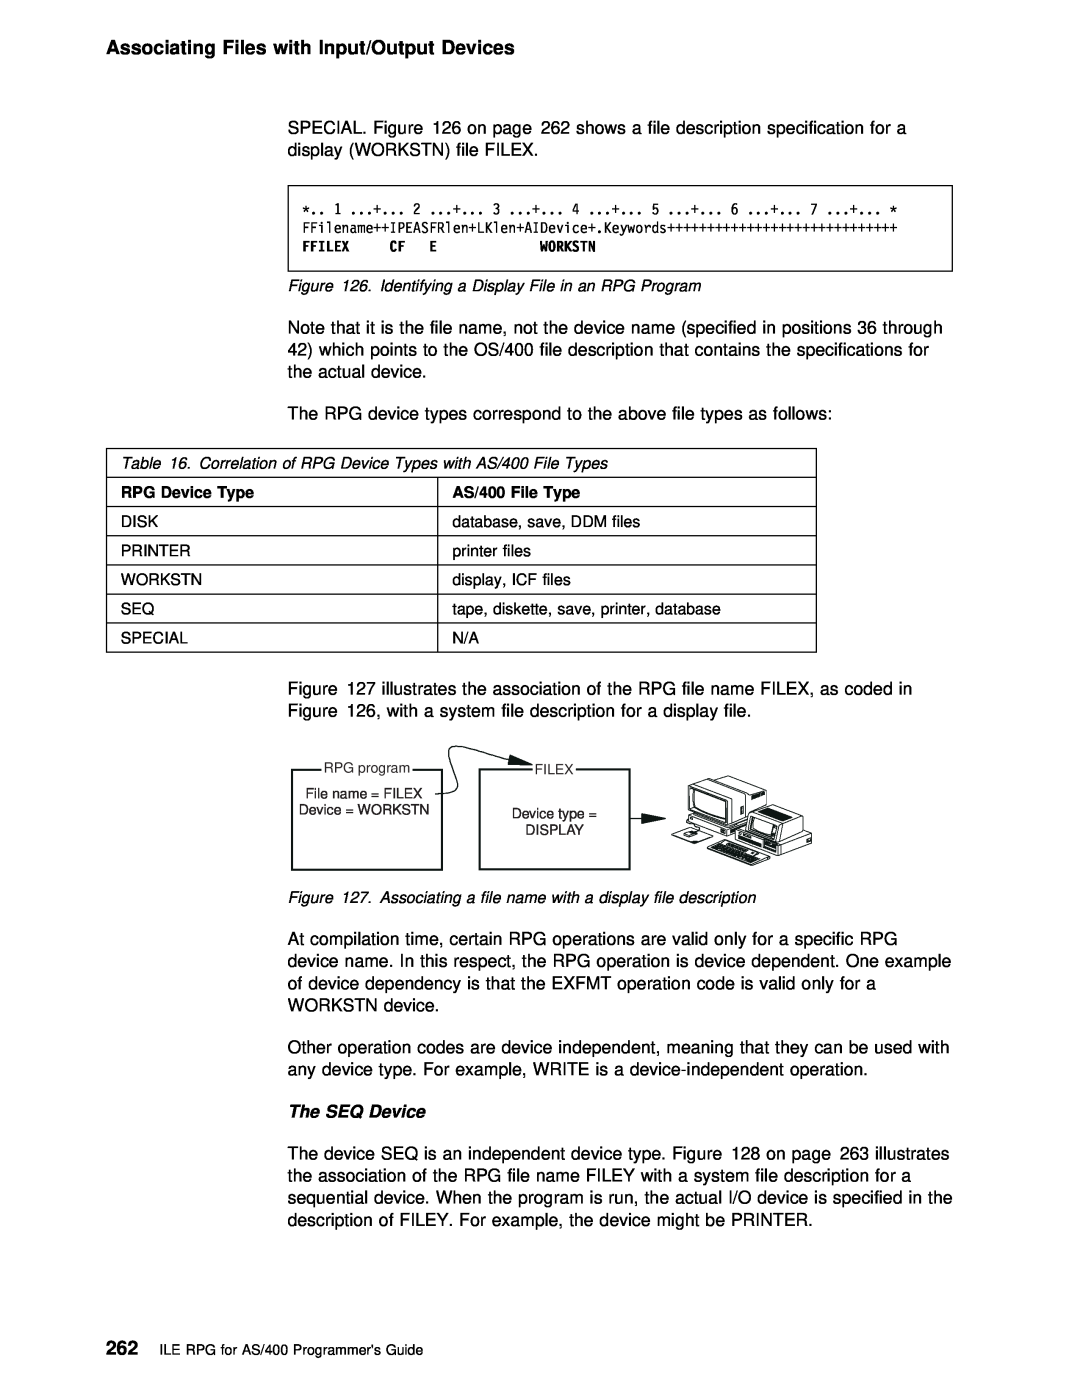 IBM AS/400 manual Associating Files with Input/Output Devices 